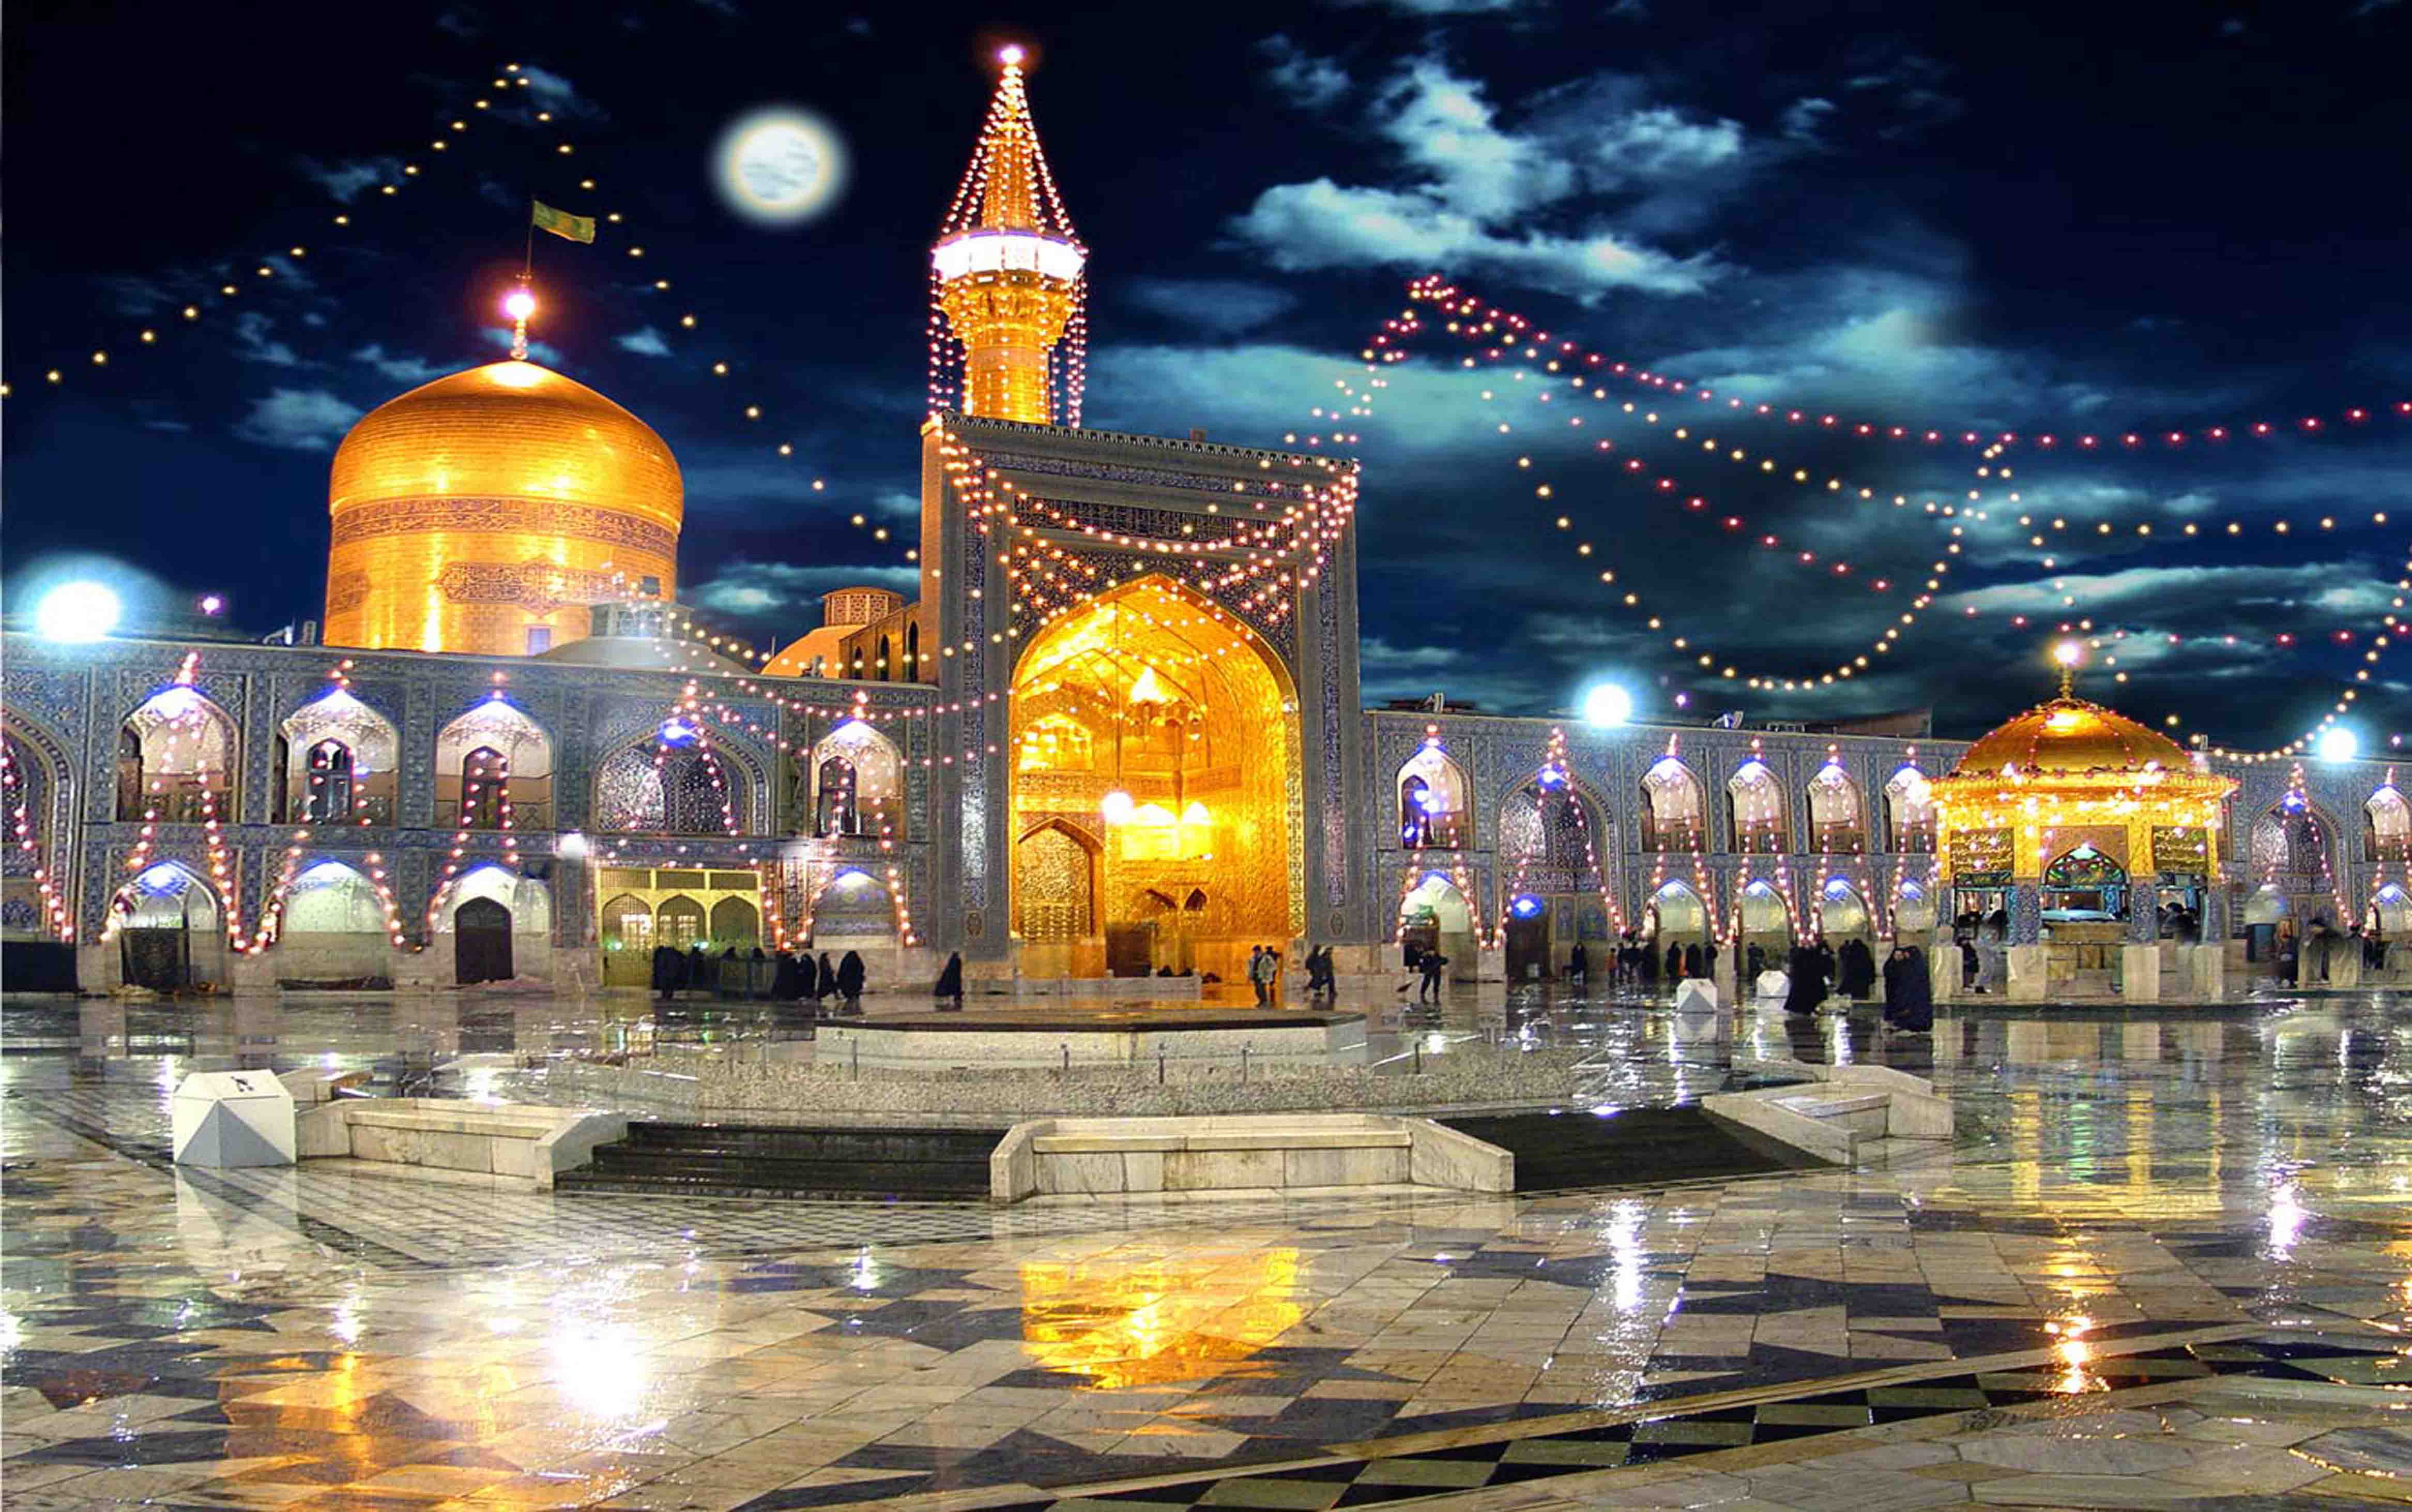 holy places to visit in iran